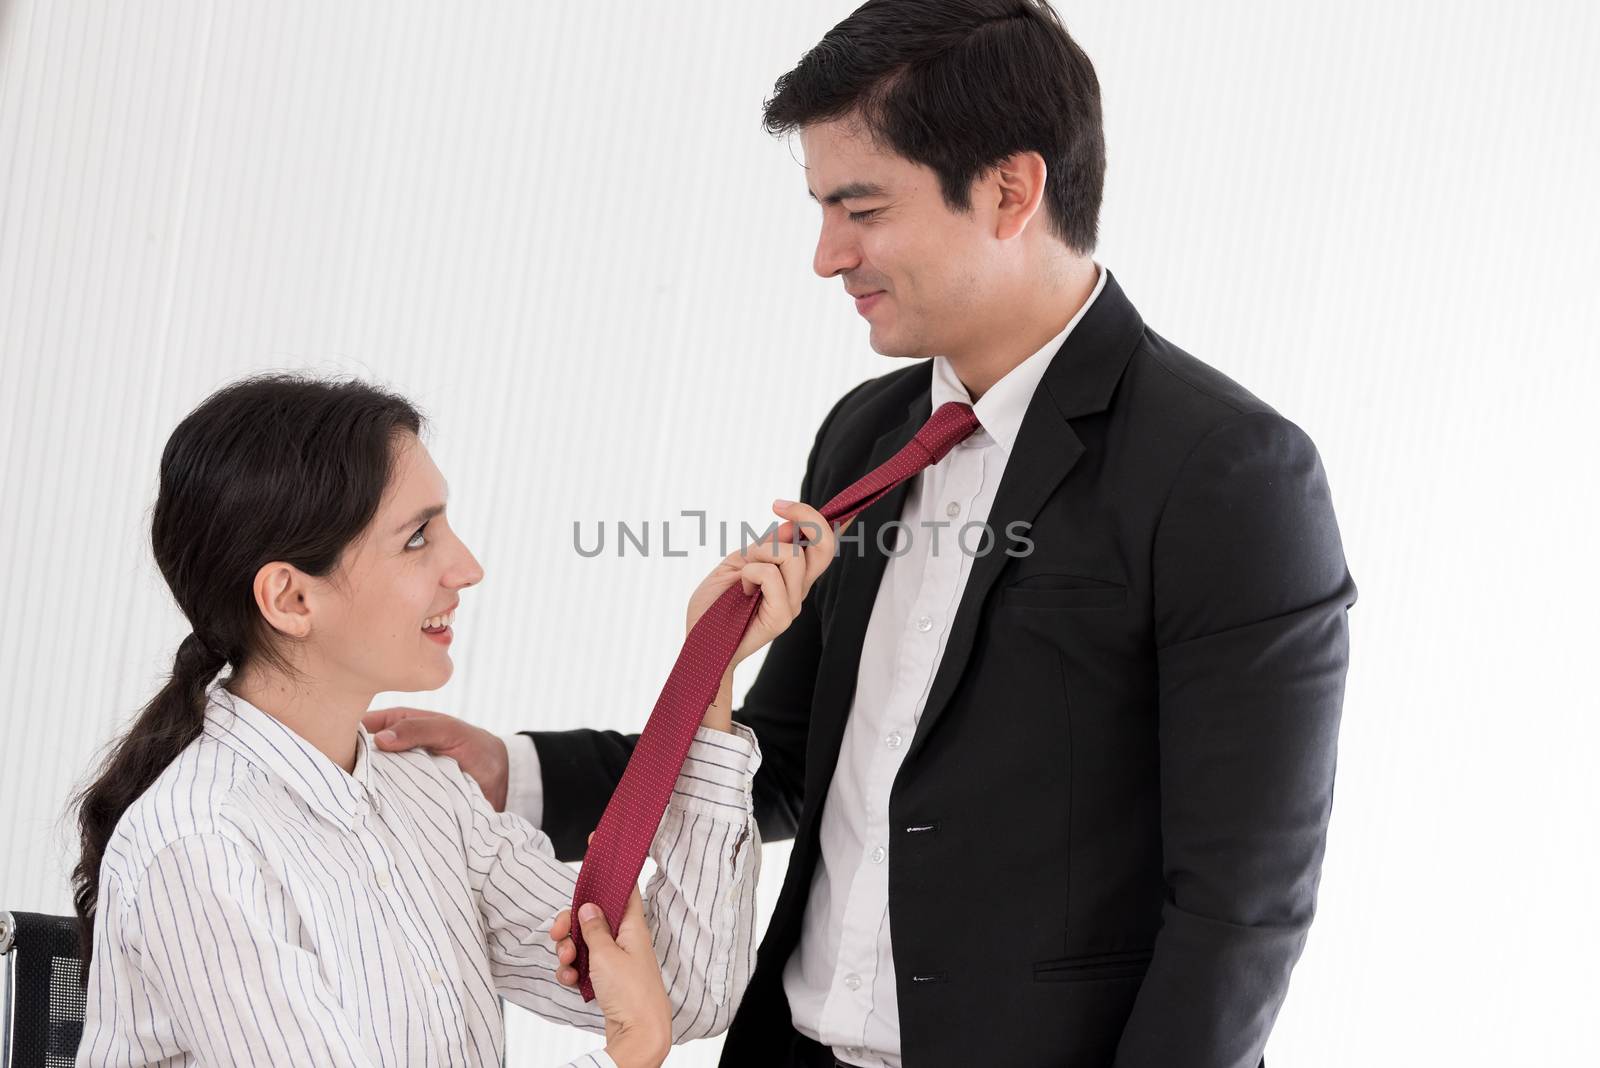 Wife tying red necktie to her husband in the office with smiling and happy.